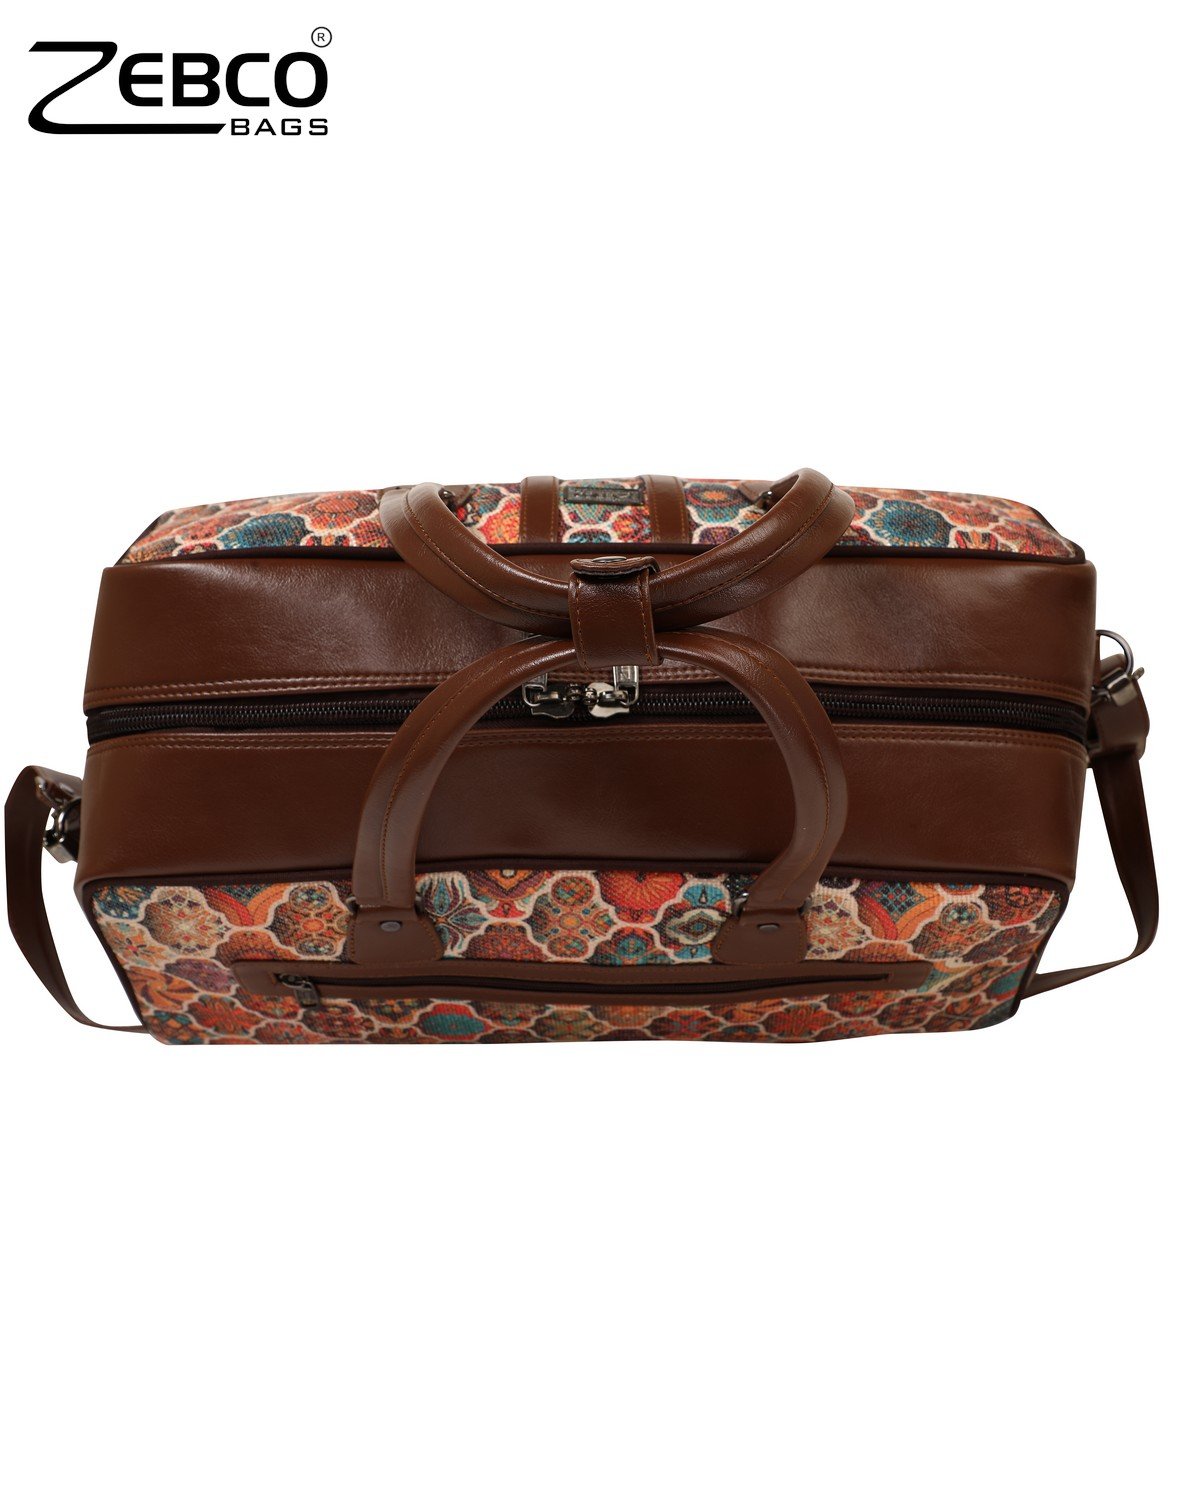 Duffle Bag - Chocolate with Braided Handles, Authentic Vintage – Vintage  Boho Bags